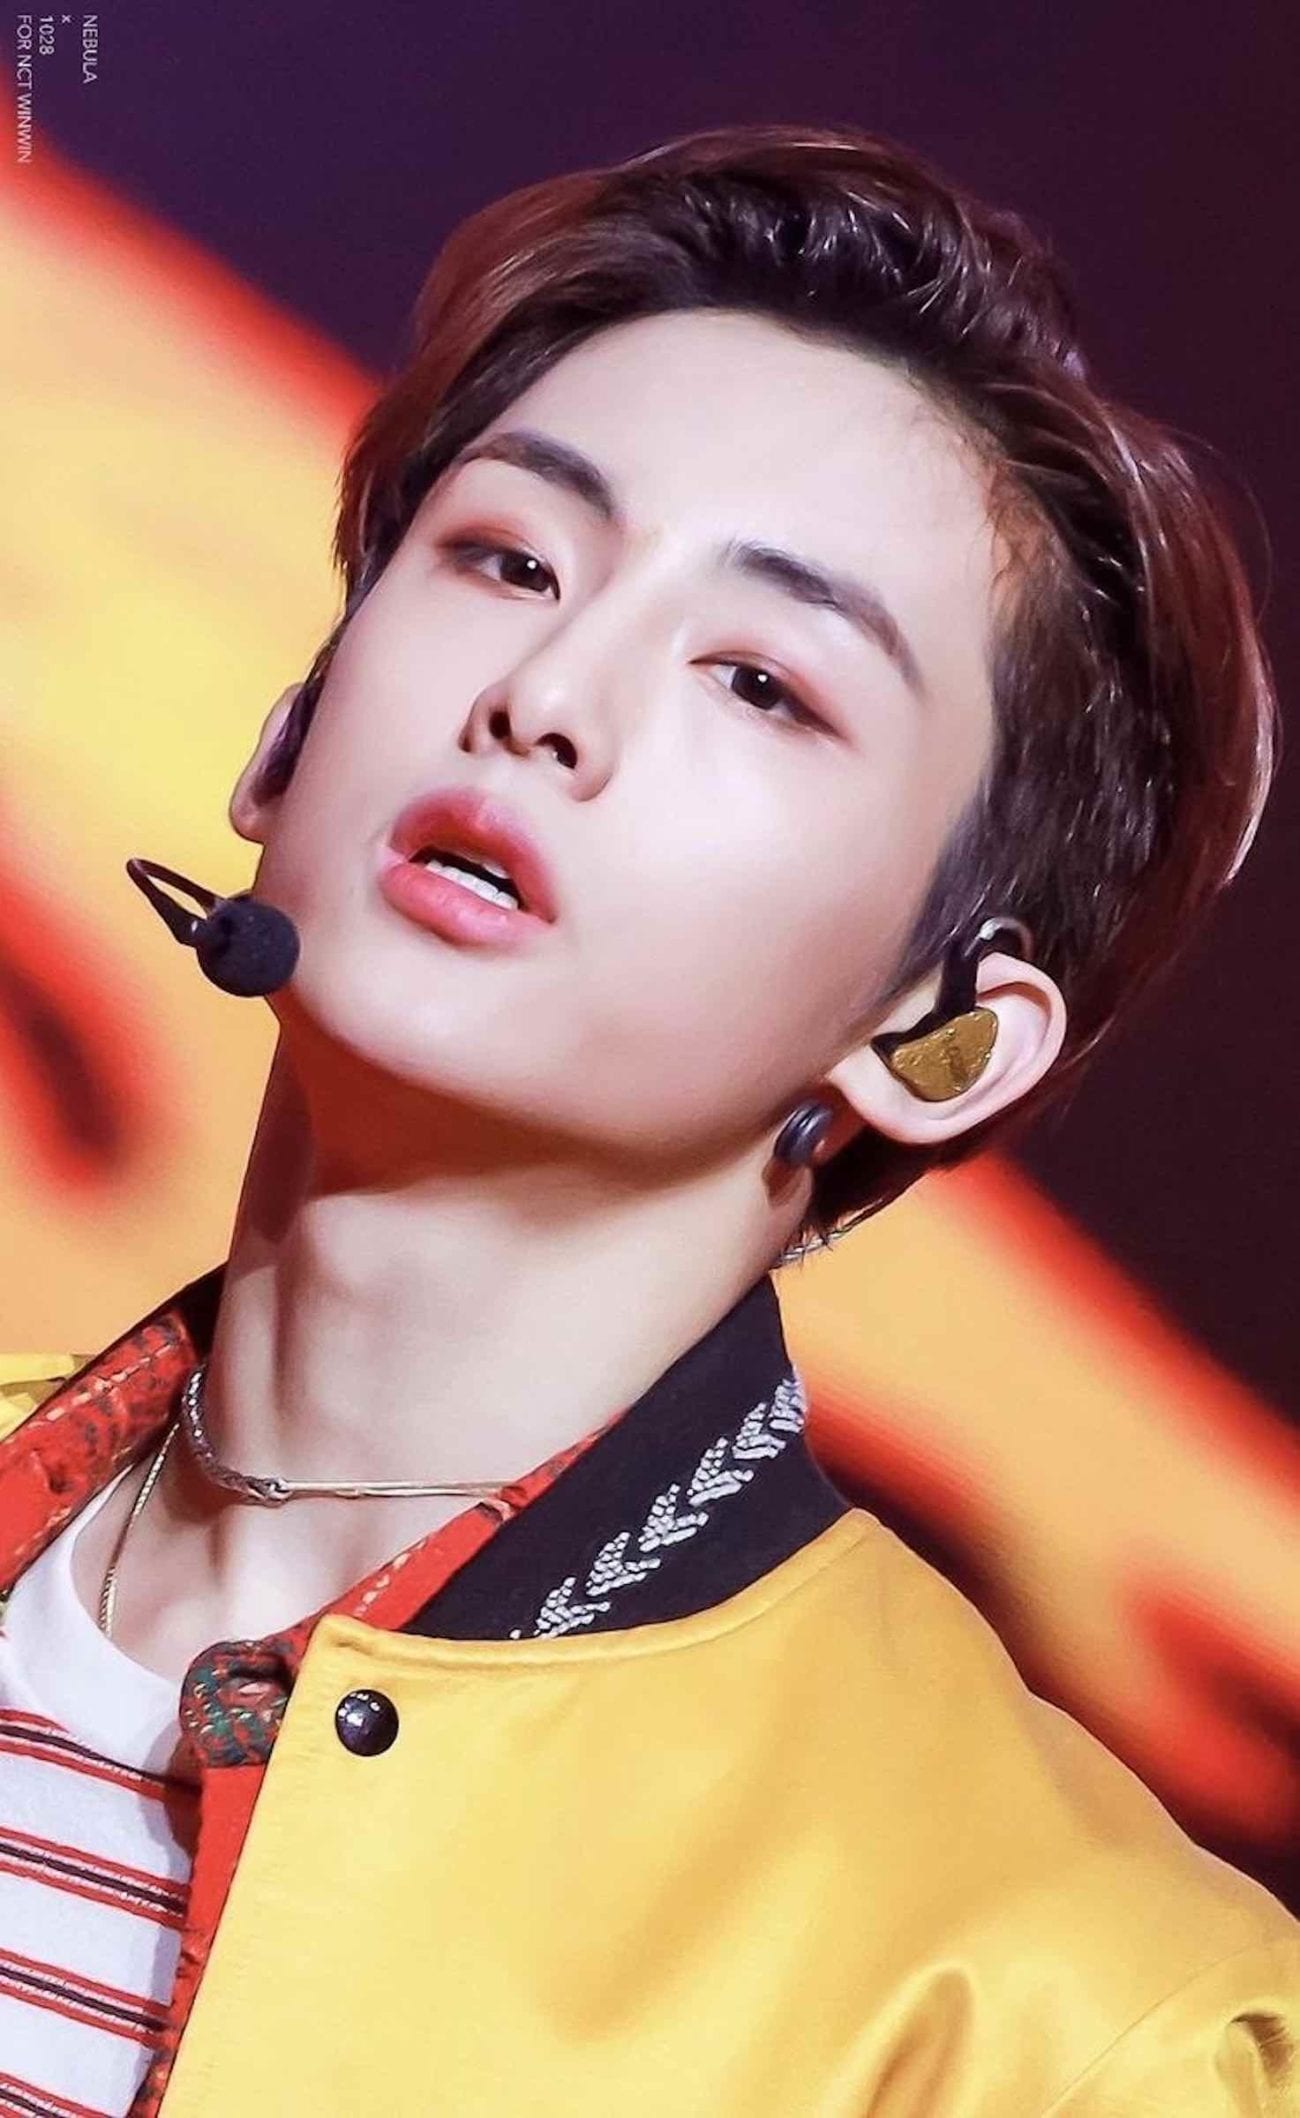 Our eyes are set on WinWin from NCT. So, if you’re curious about this rapper and singer, here’s why he should be your next idol obsession.